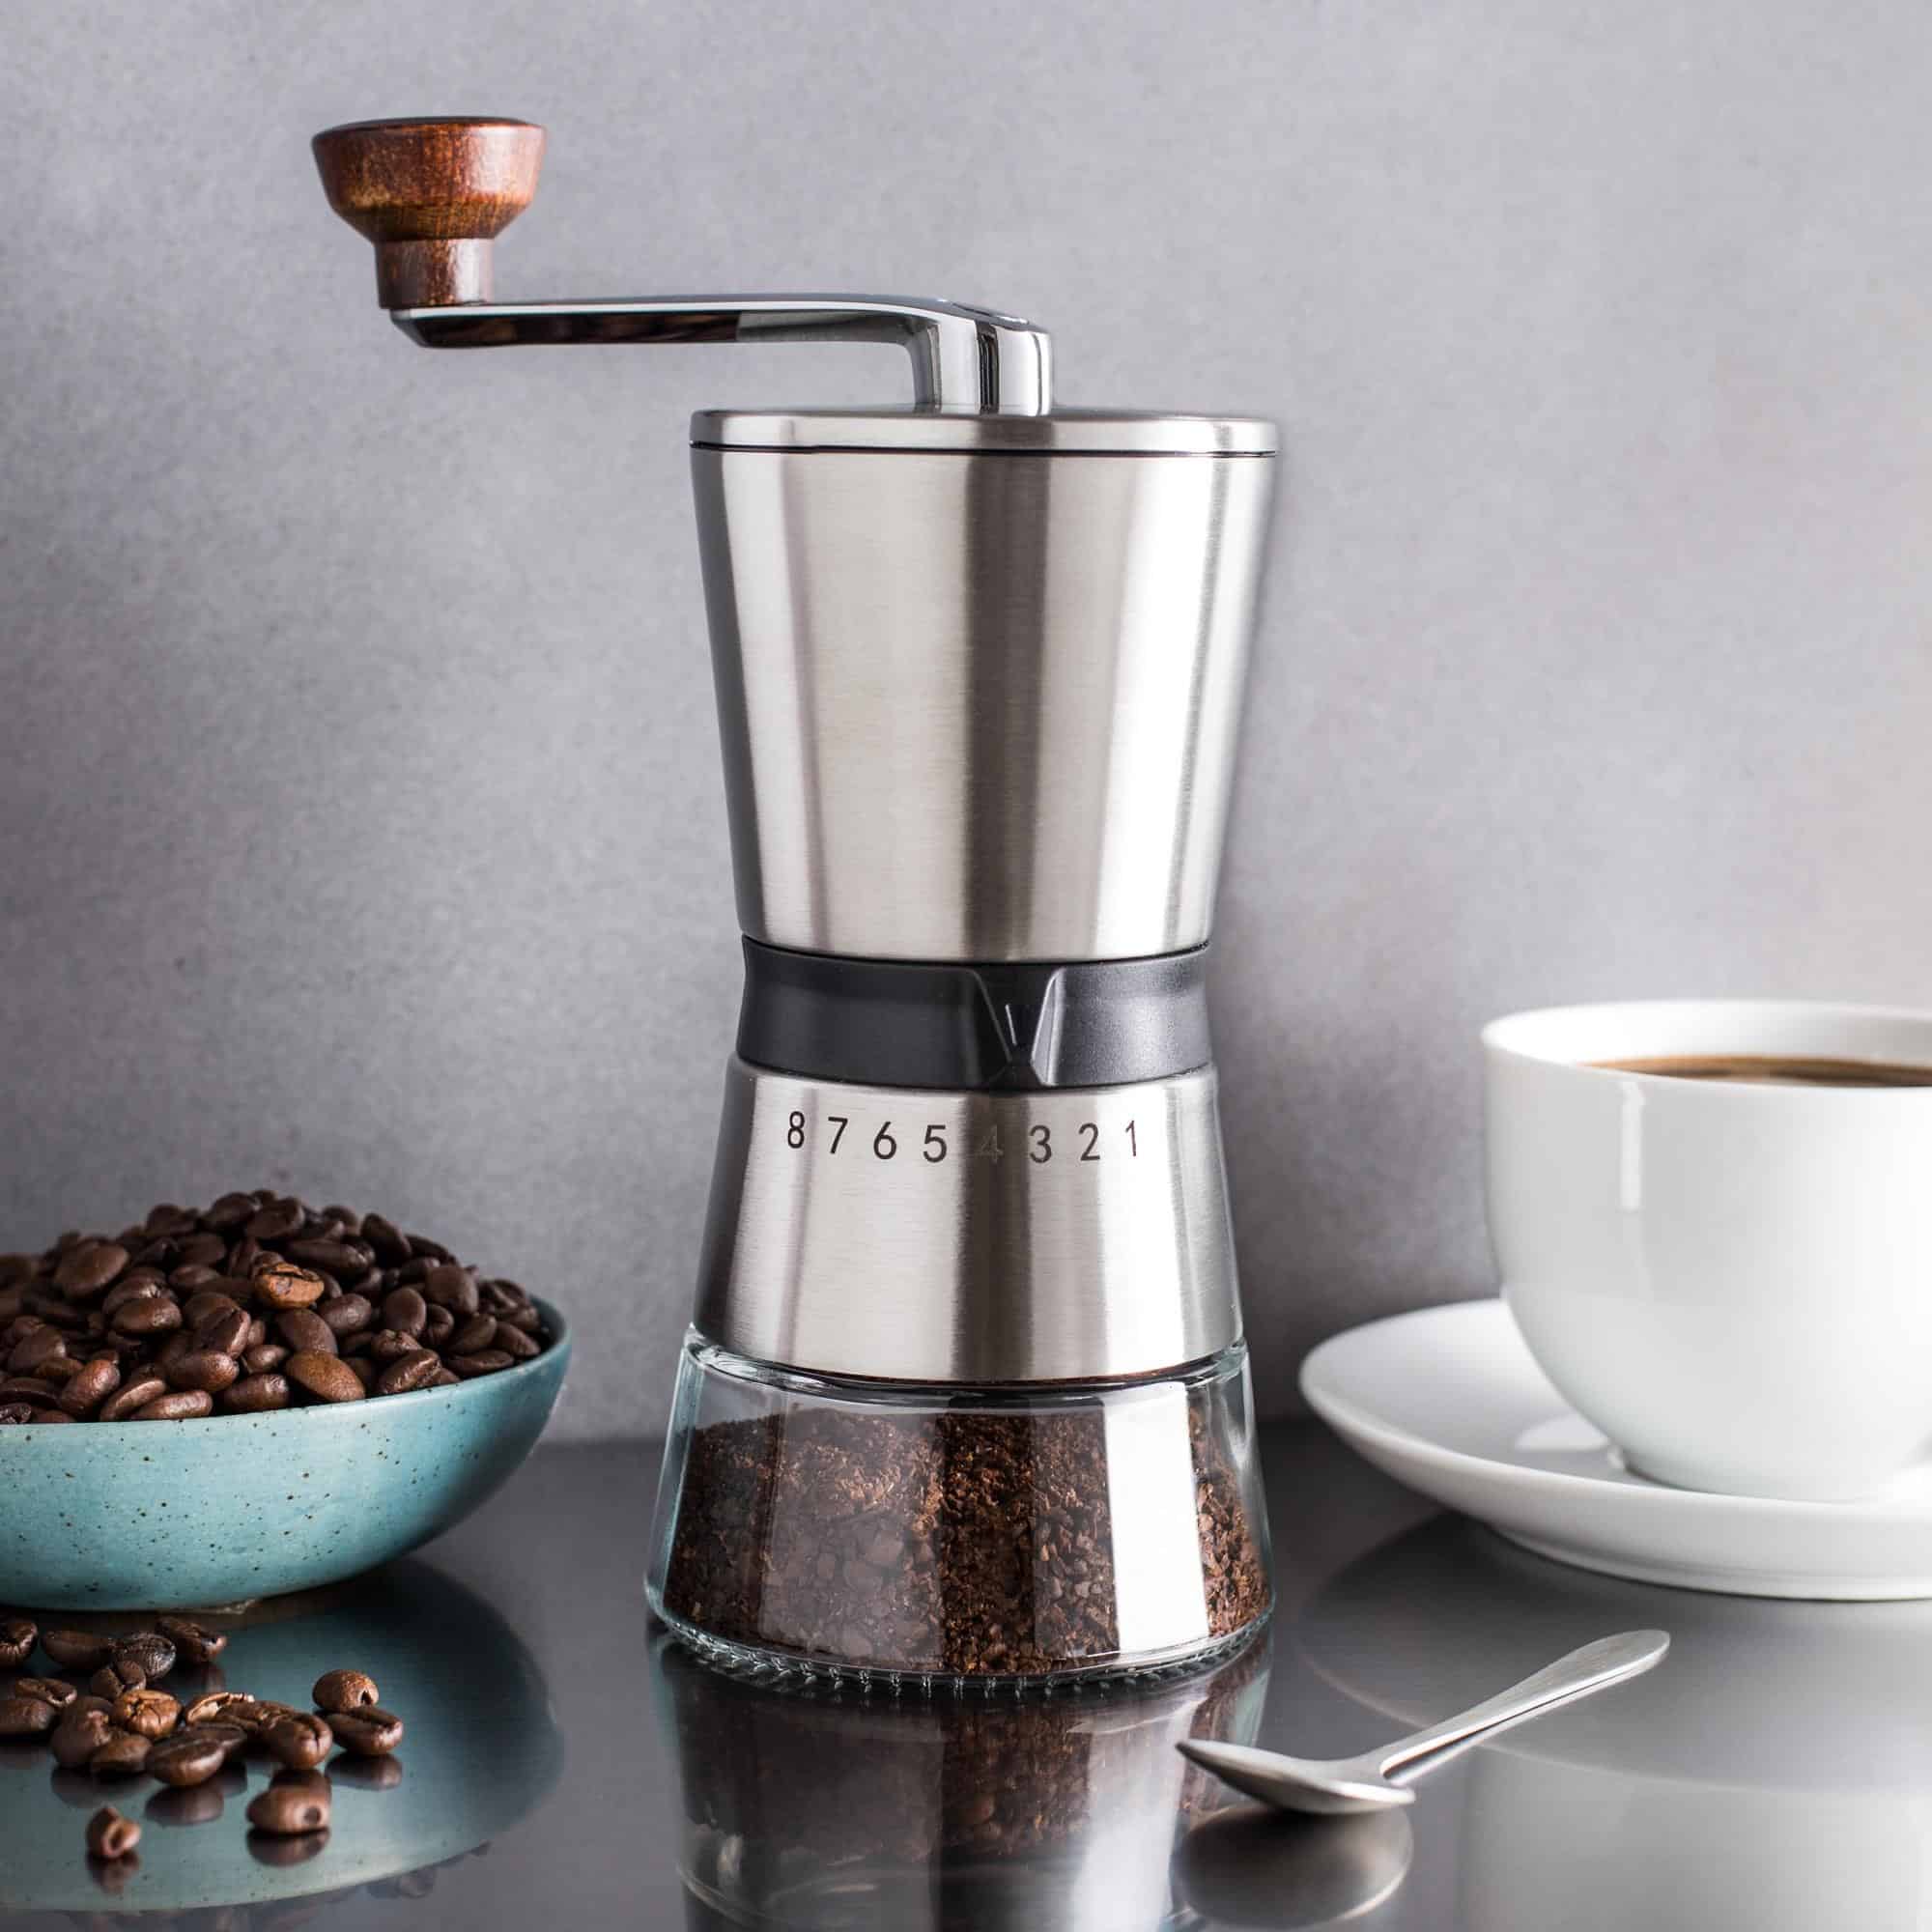 What do you need to know about the Italian manual coffee grinder?